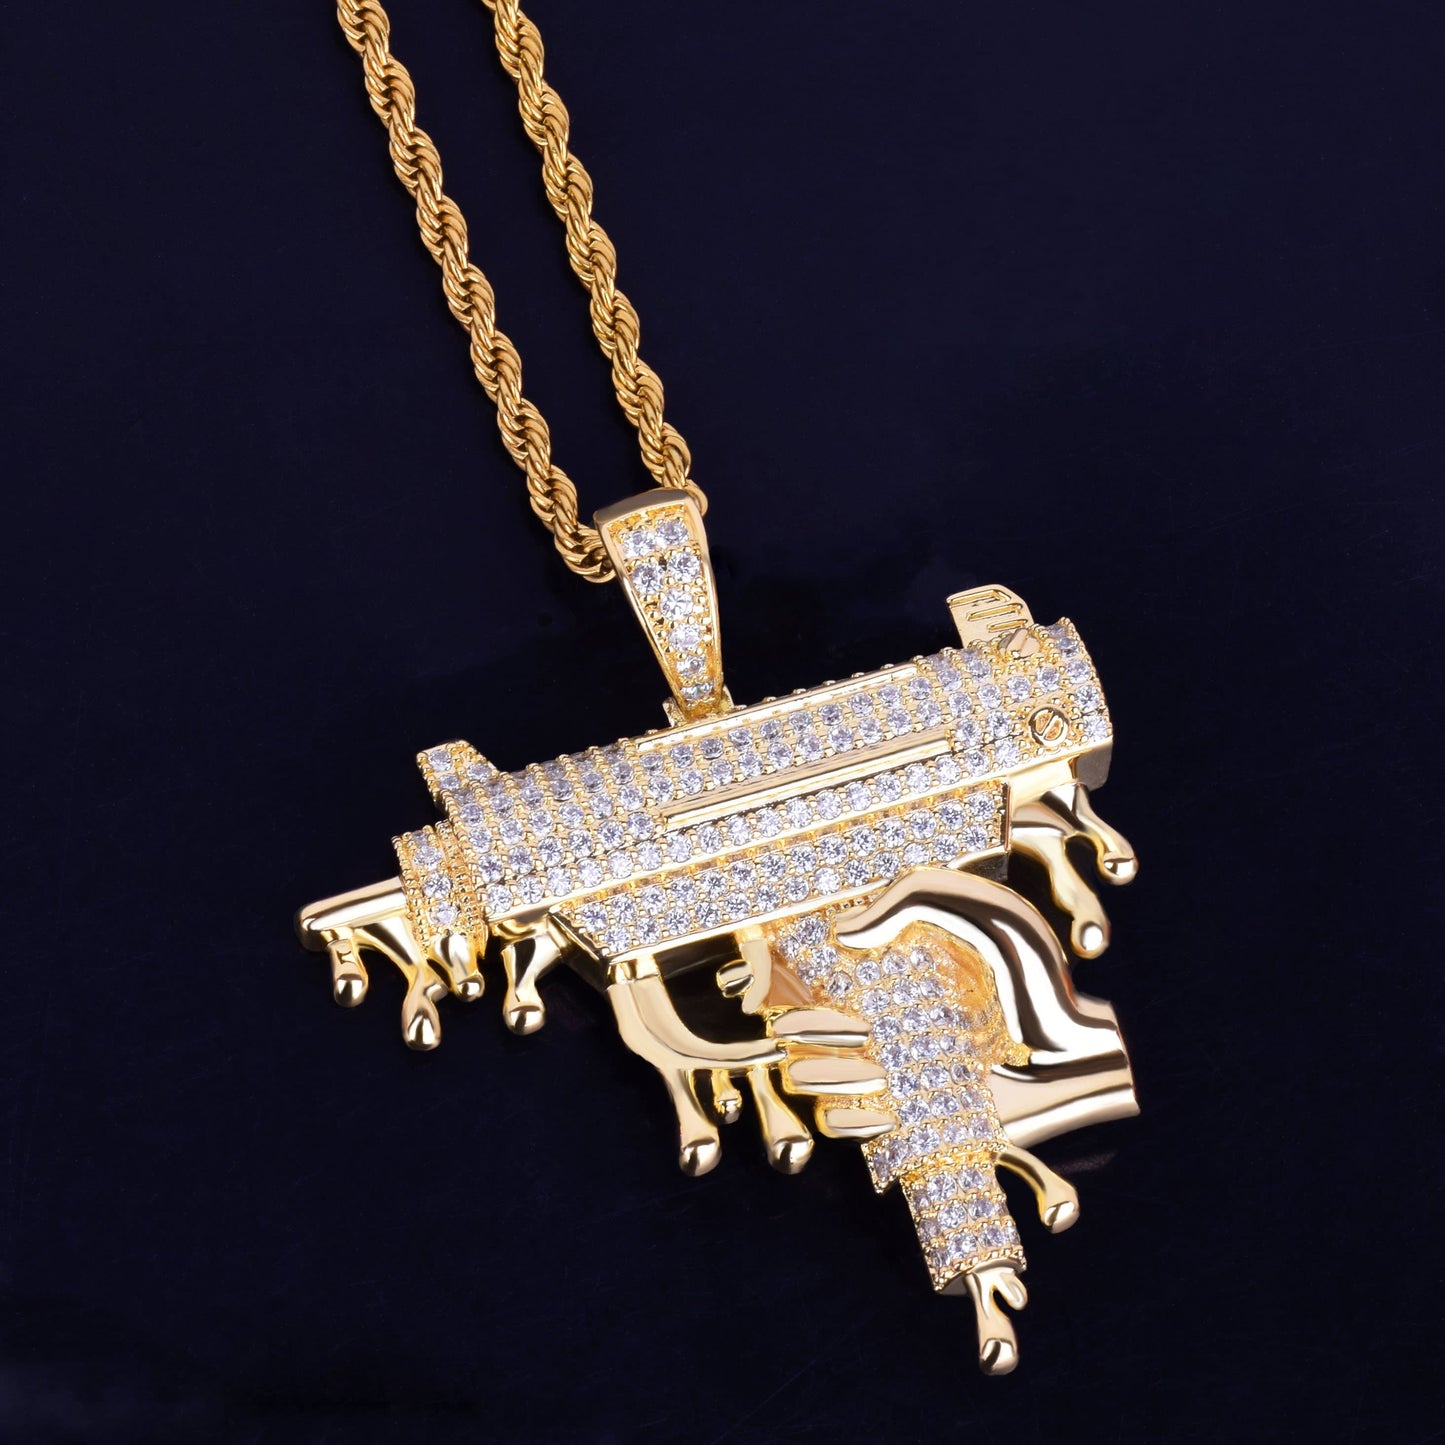 Hand Holding Dripping Gun Shape Pendant Necklace Gold Color Iced Out Cubic Zirconia Men's Hip hop Rock Jewelry